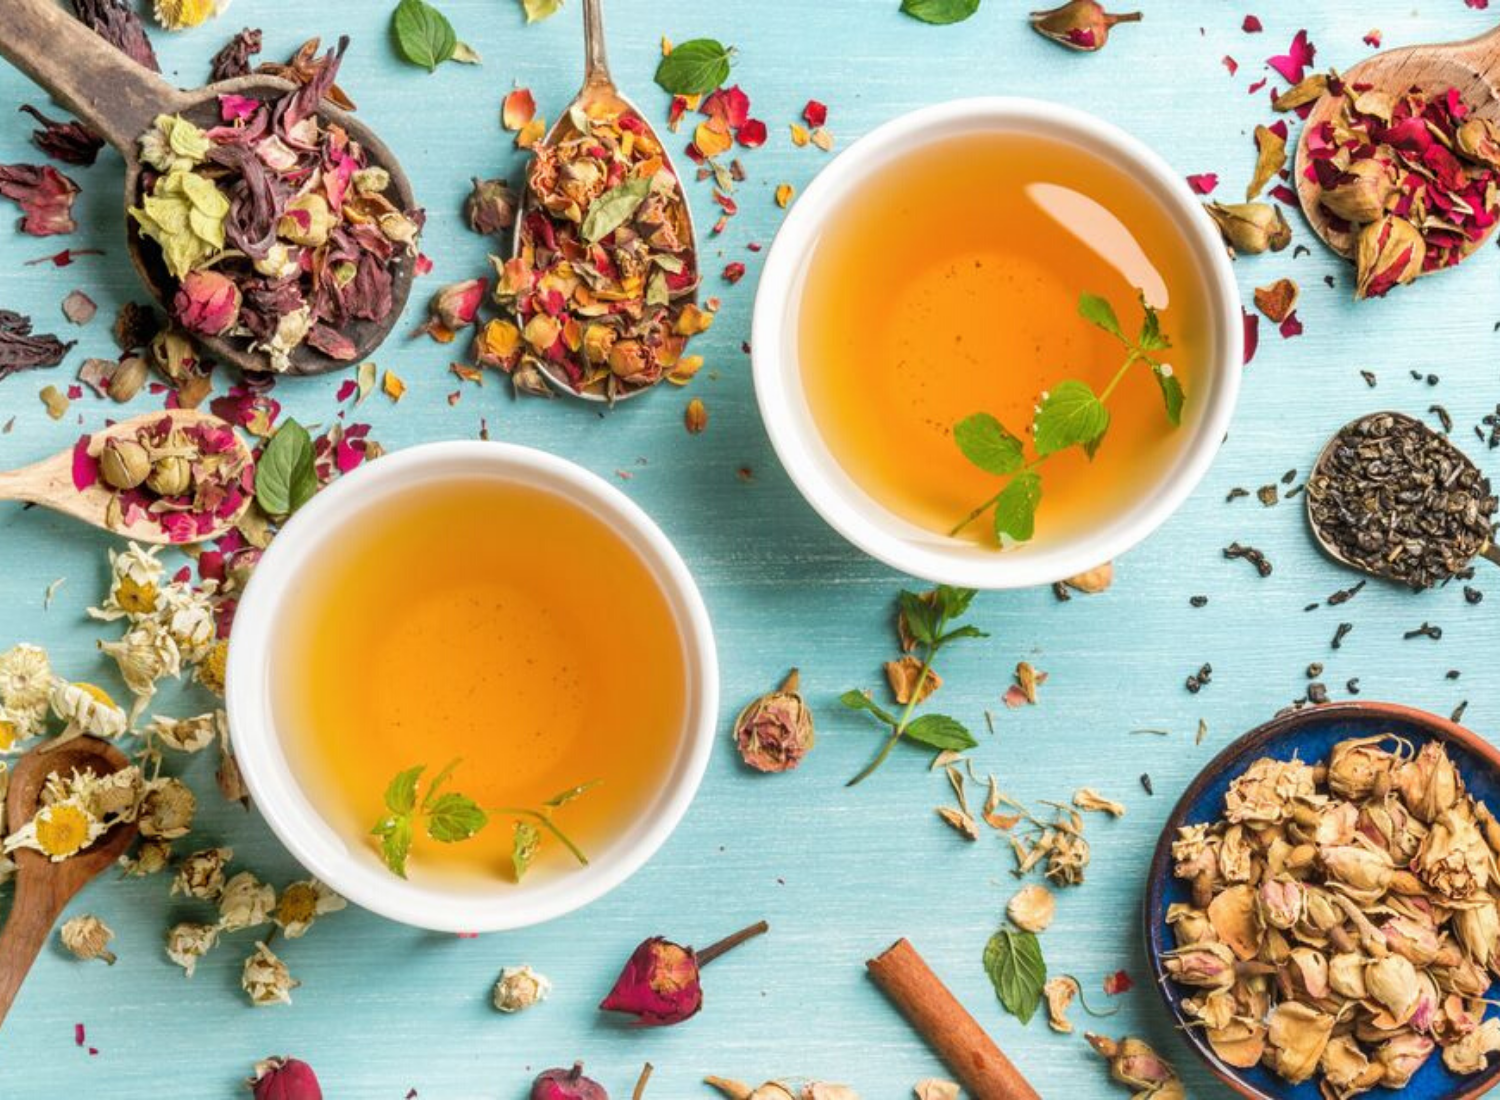 17 Most Popular Teas In The World